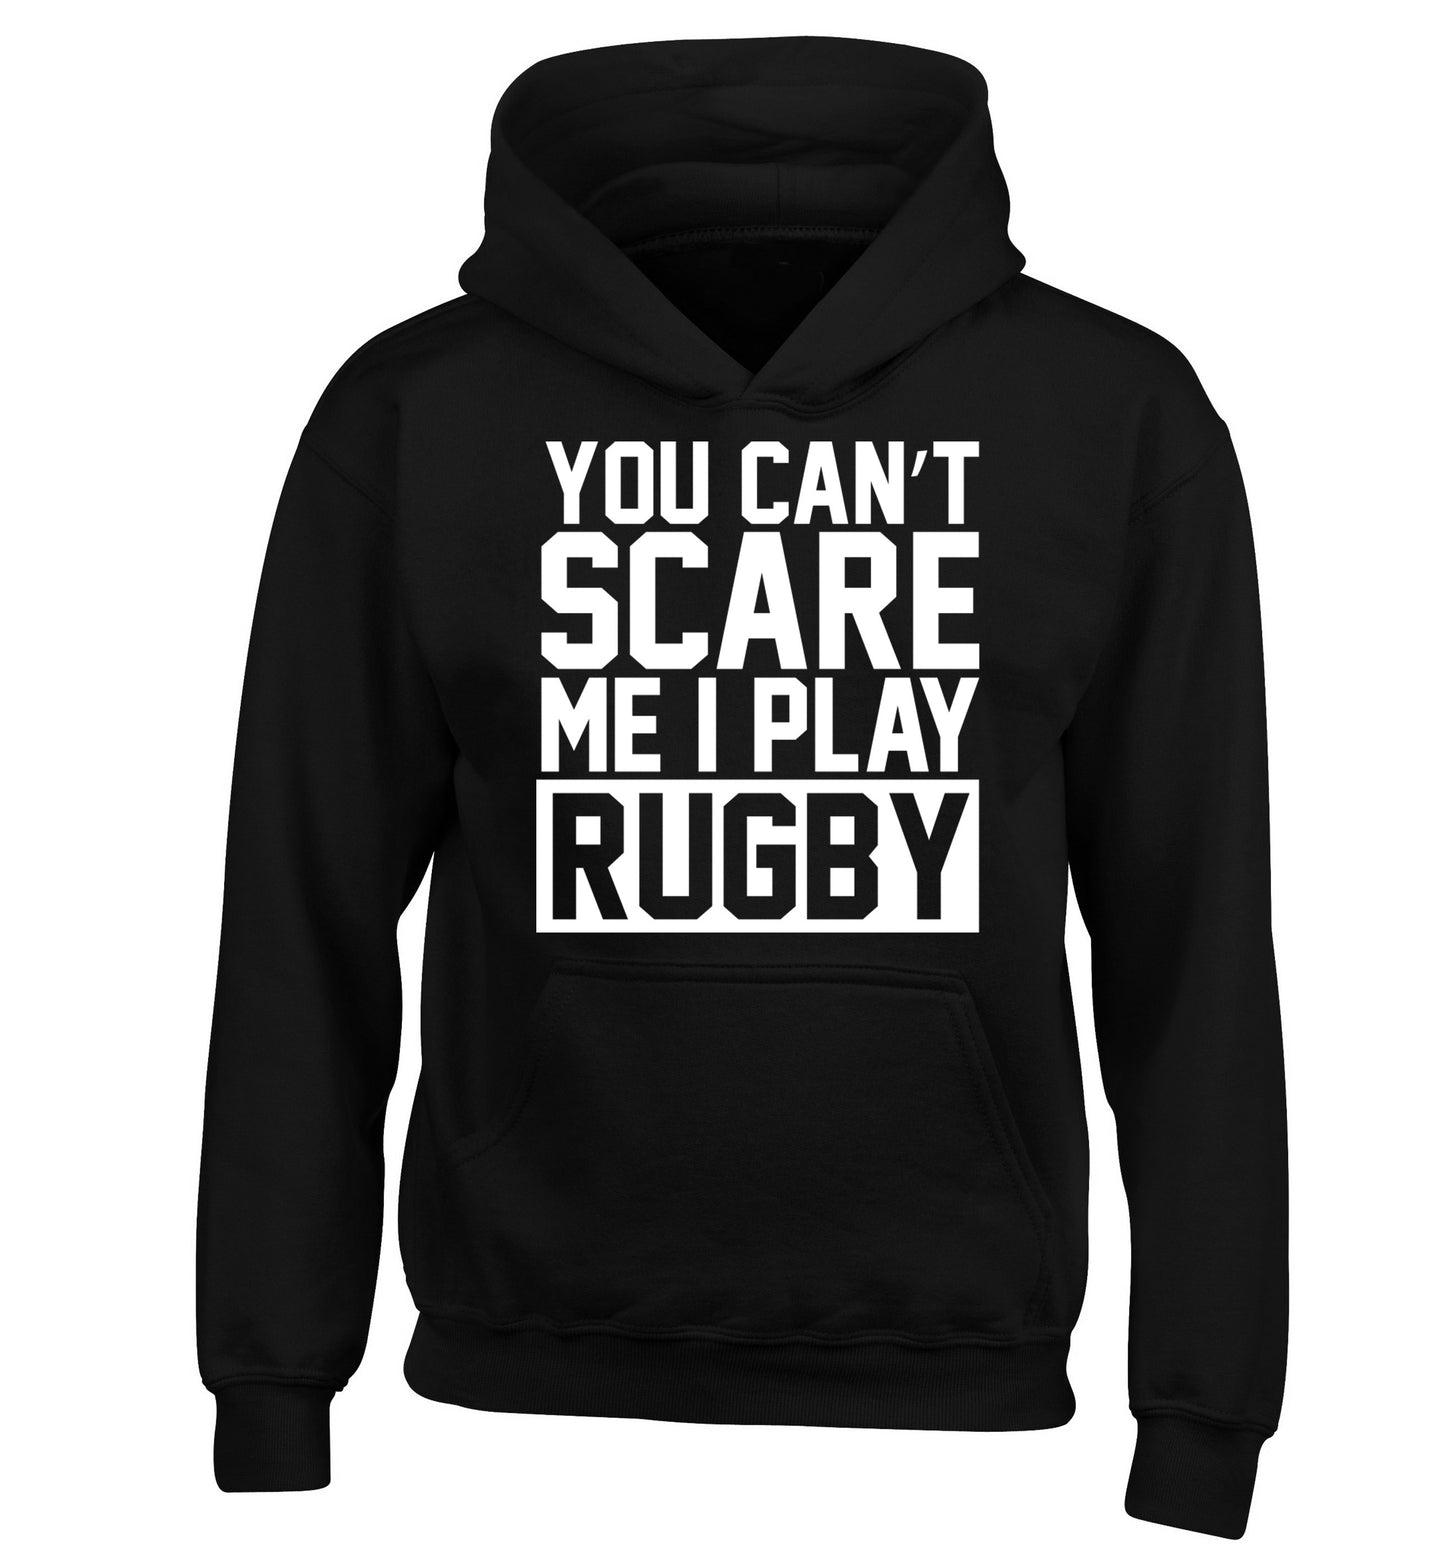 You can't scare me I play rugby children's black hoodie 12-14 Years